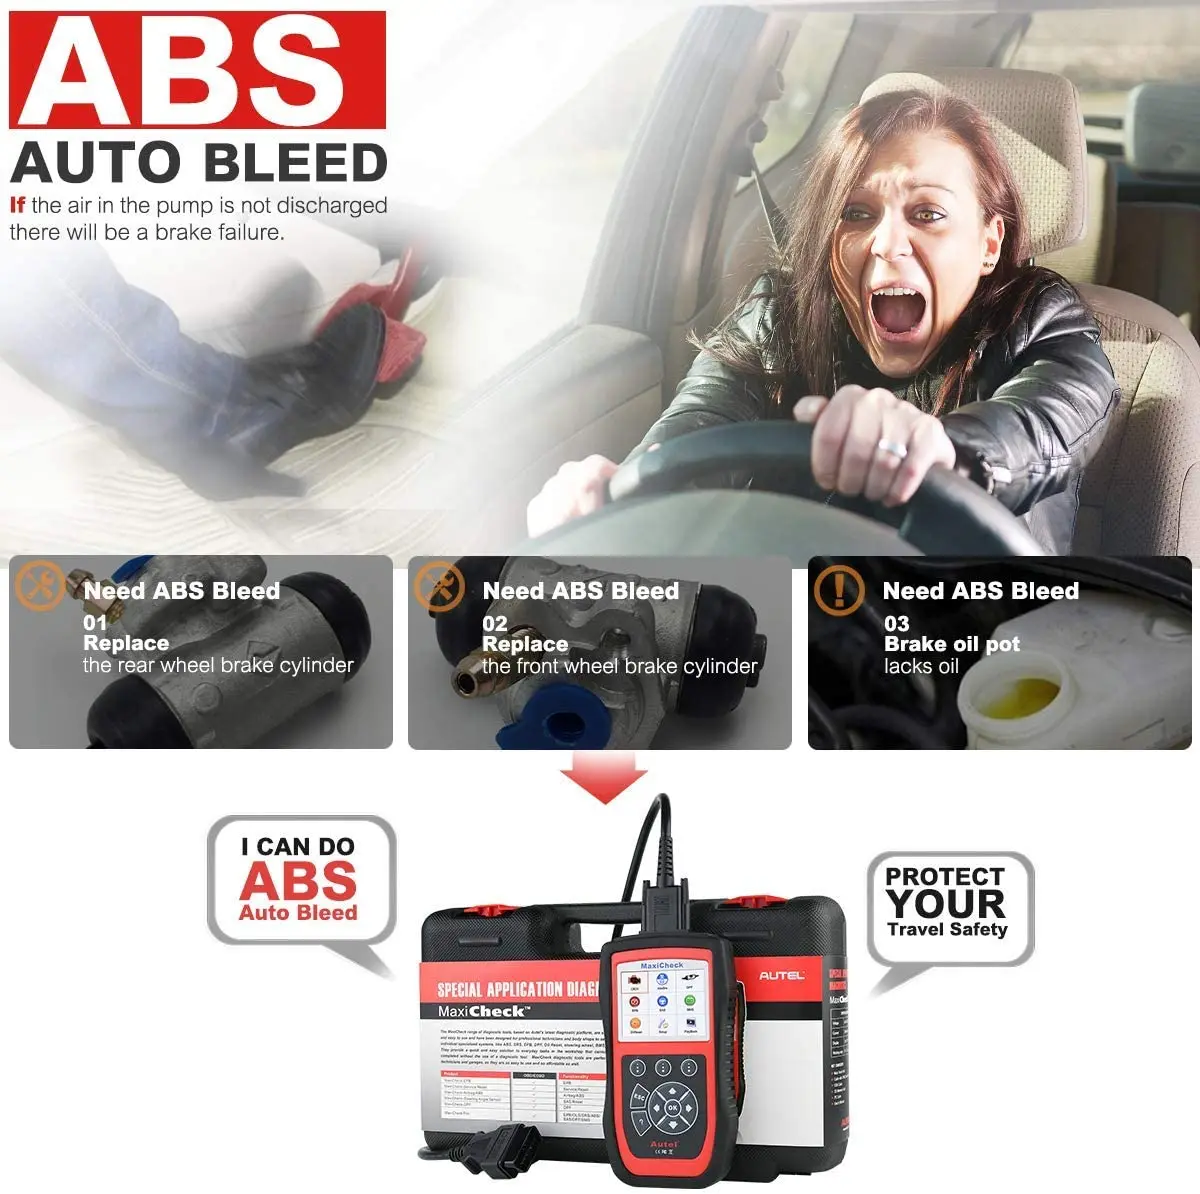 car battery charger price Autel MaxiCheck Pro ABS Autobleed OBD2 Diagnostic Tool With ABS/ SRS/BMS/DPF/EPB/Oil Reset/SAS Same as AL519/ML519 Code Reader auto battery charger